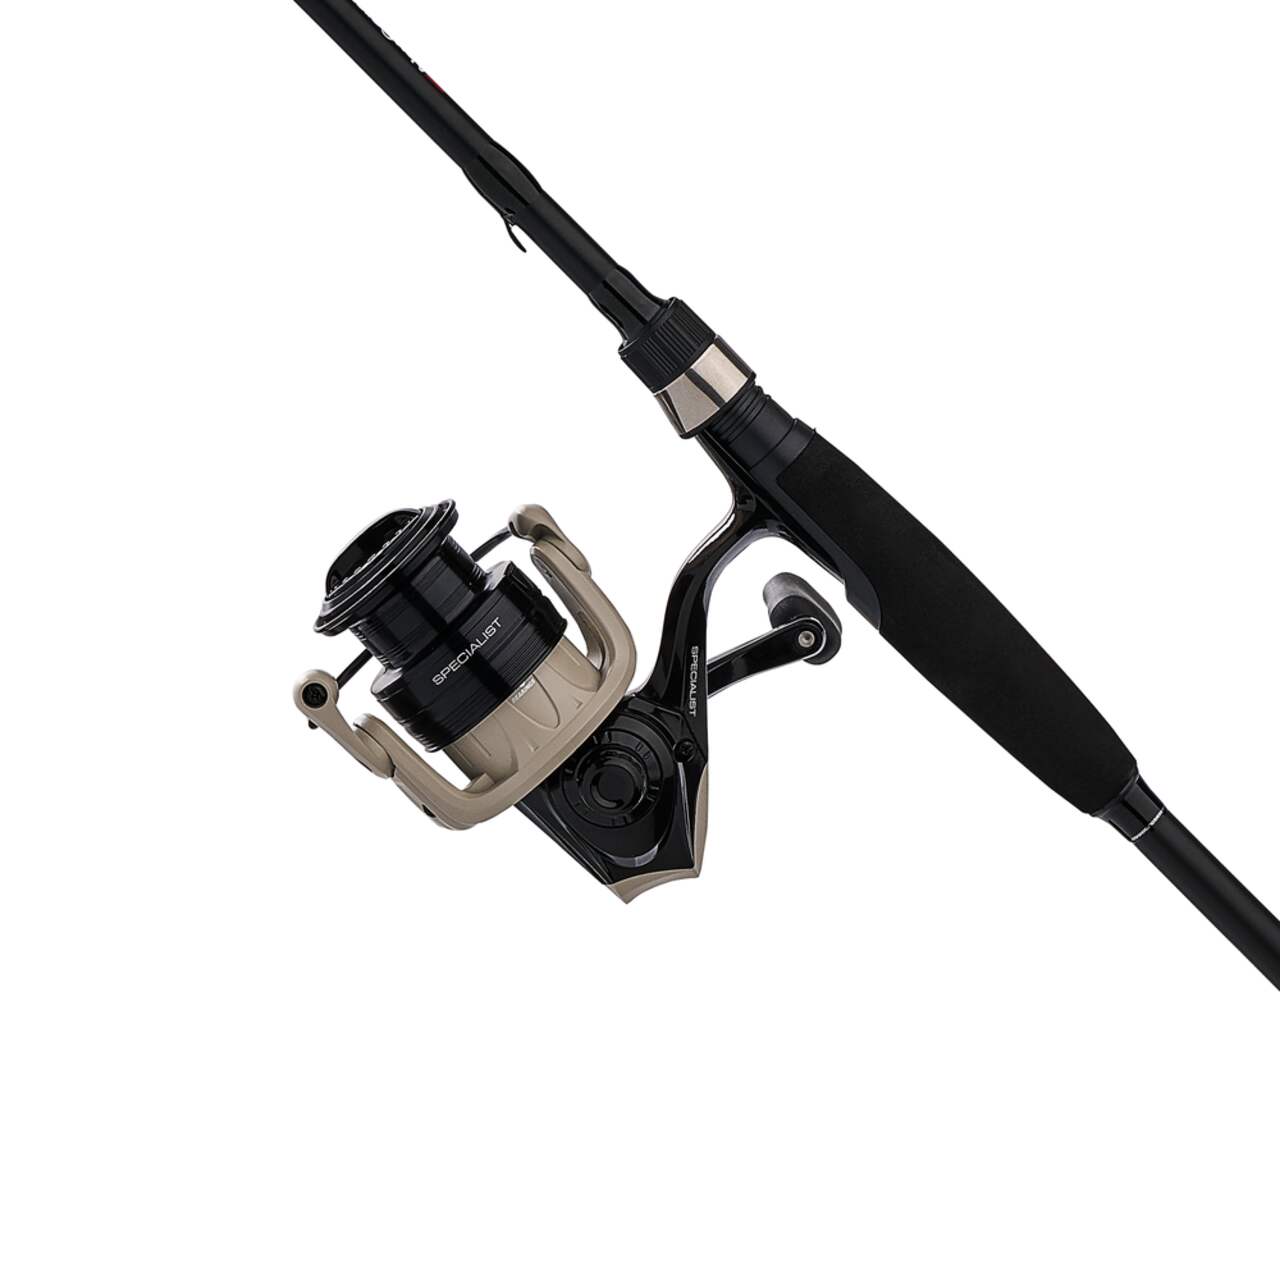 https://media-www.canadiantire.ca/product/playing/fishing/fishing-equipment/0775455/abu-garcia-specialist-spinning-combo-6-6-medium-4d994d5e-4a05-4ffc-b1bb-8532cbf01662.png?imdensity=1&imwidth=1244&impolicy=mZoom